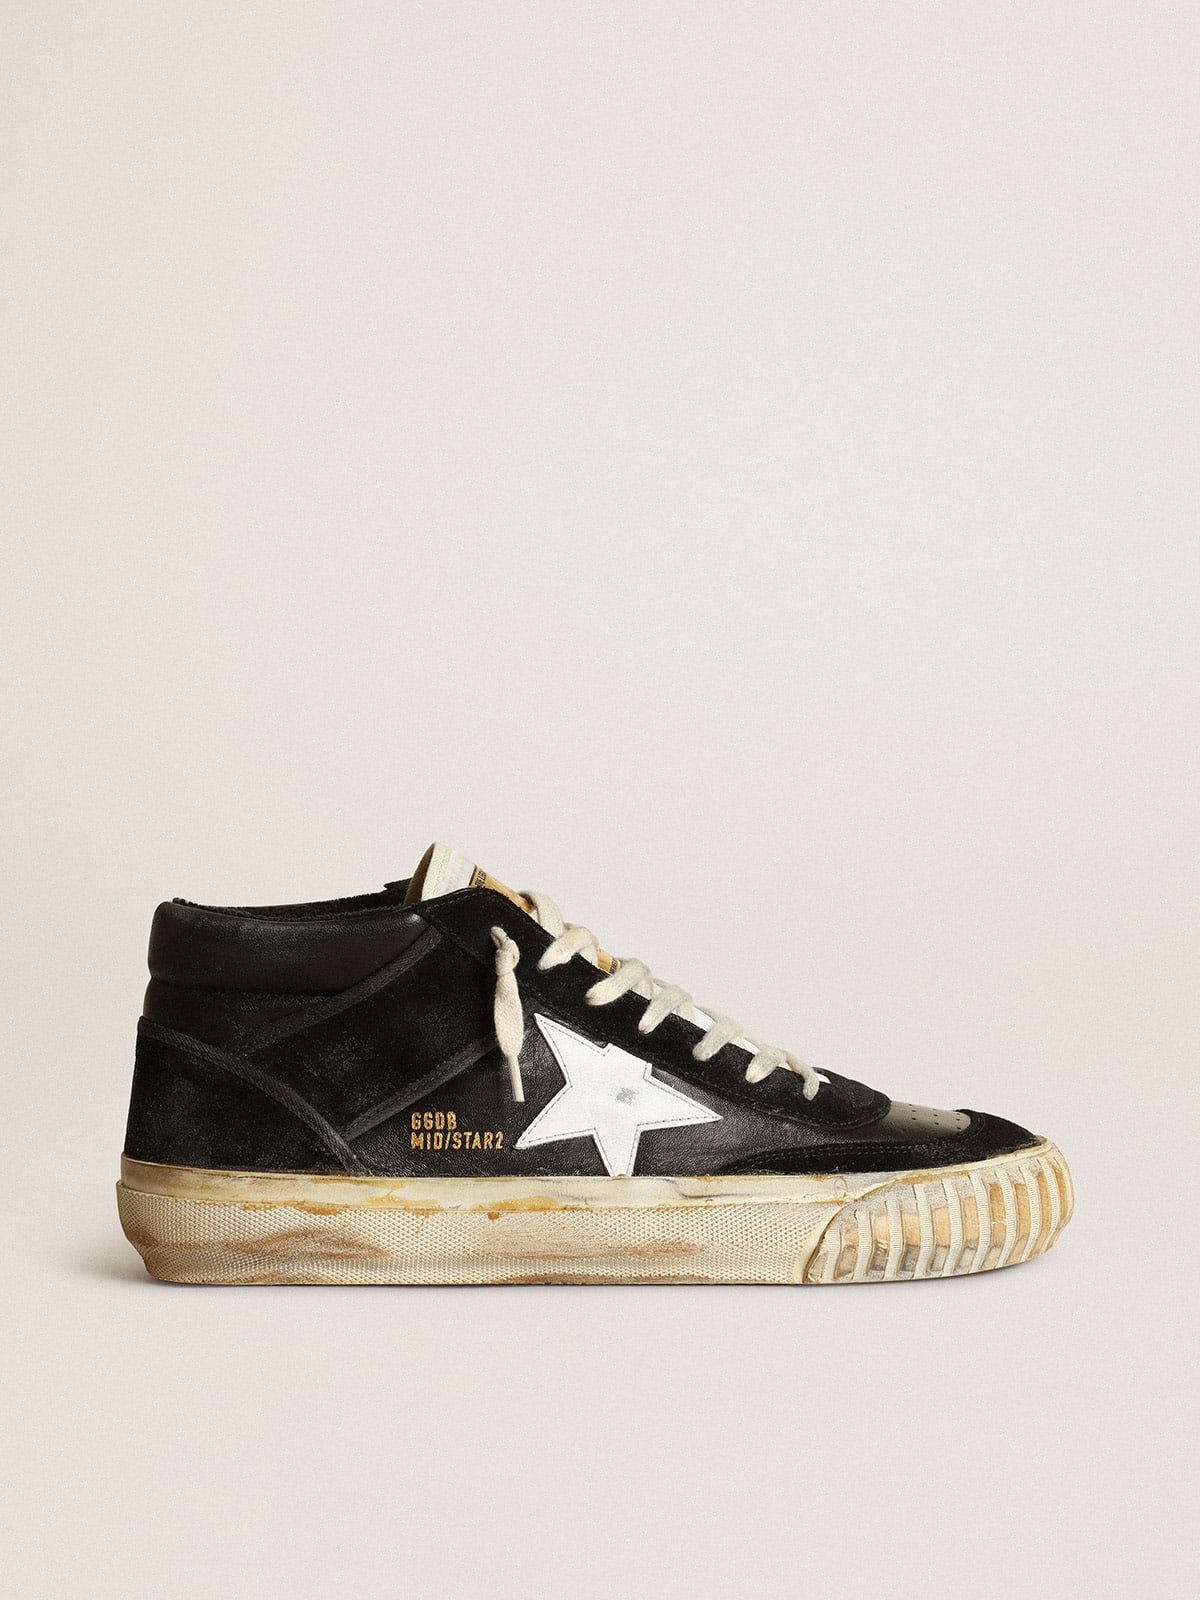 Men's Mid Star in black nappa and suede with white leather star